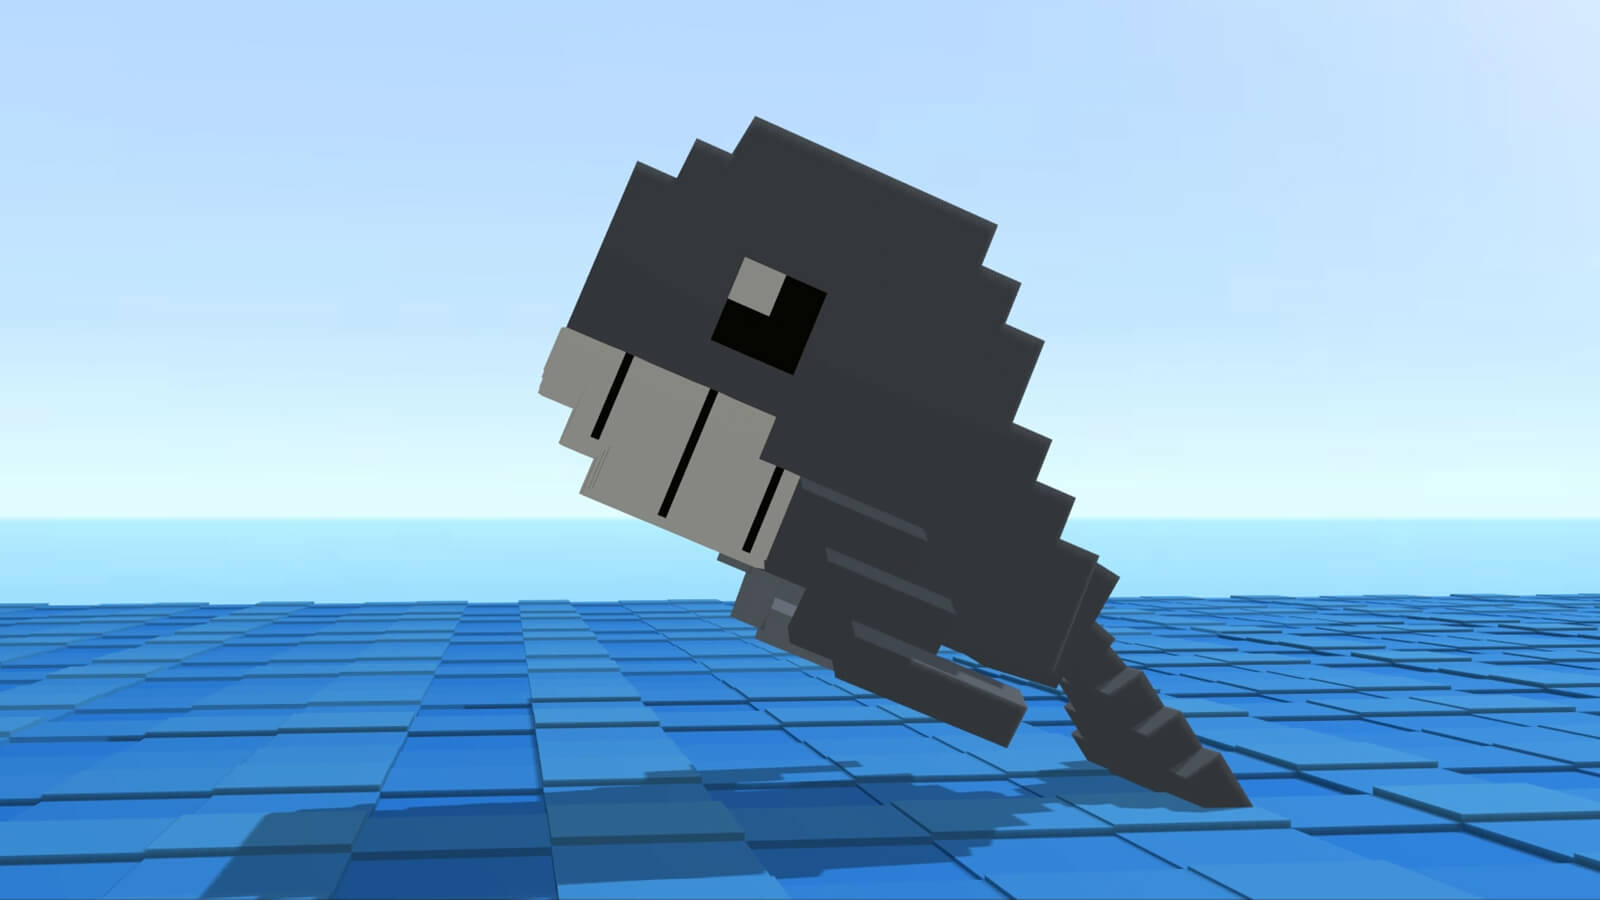 A blocky gray whale jumps out of the water.